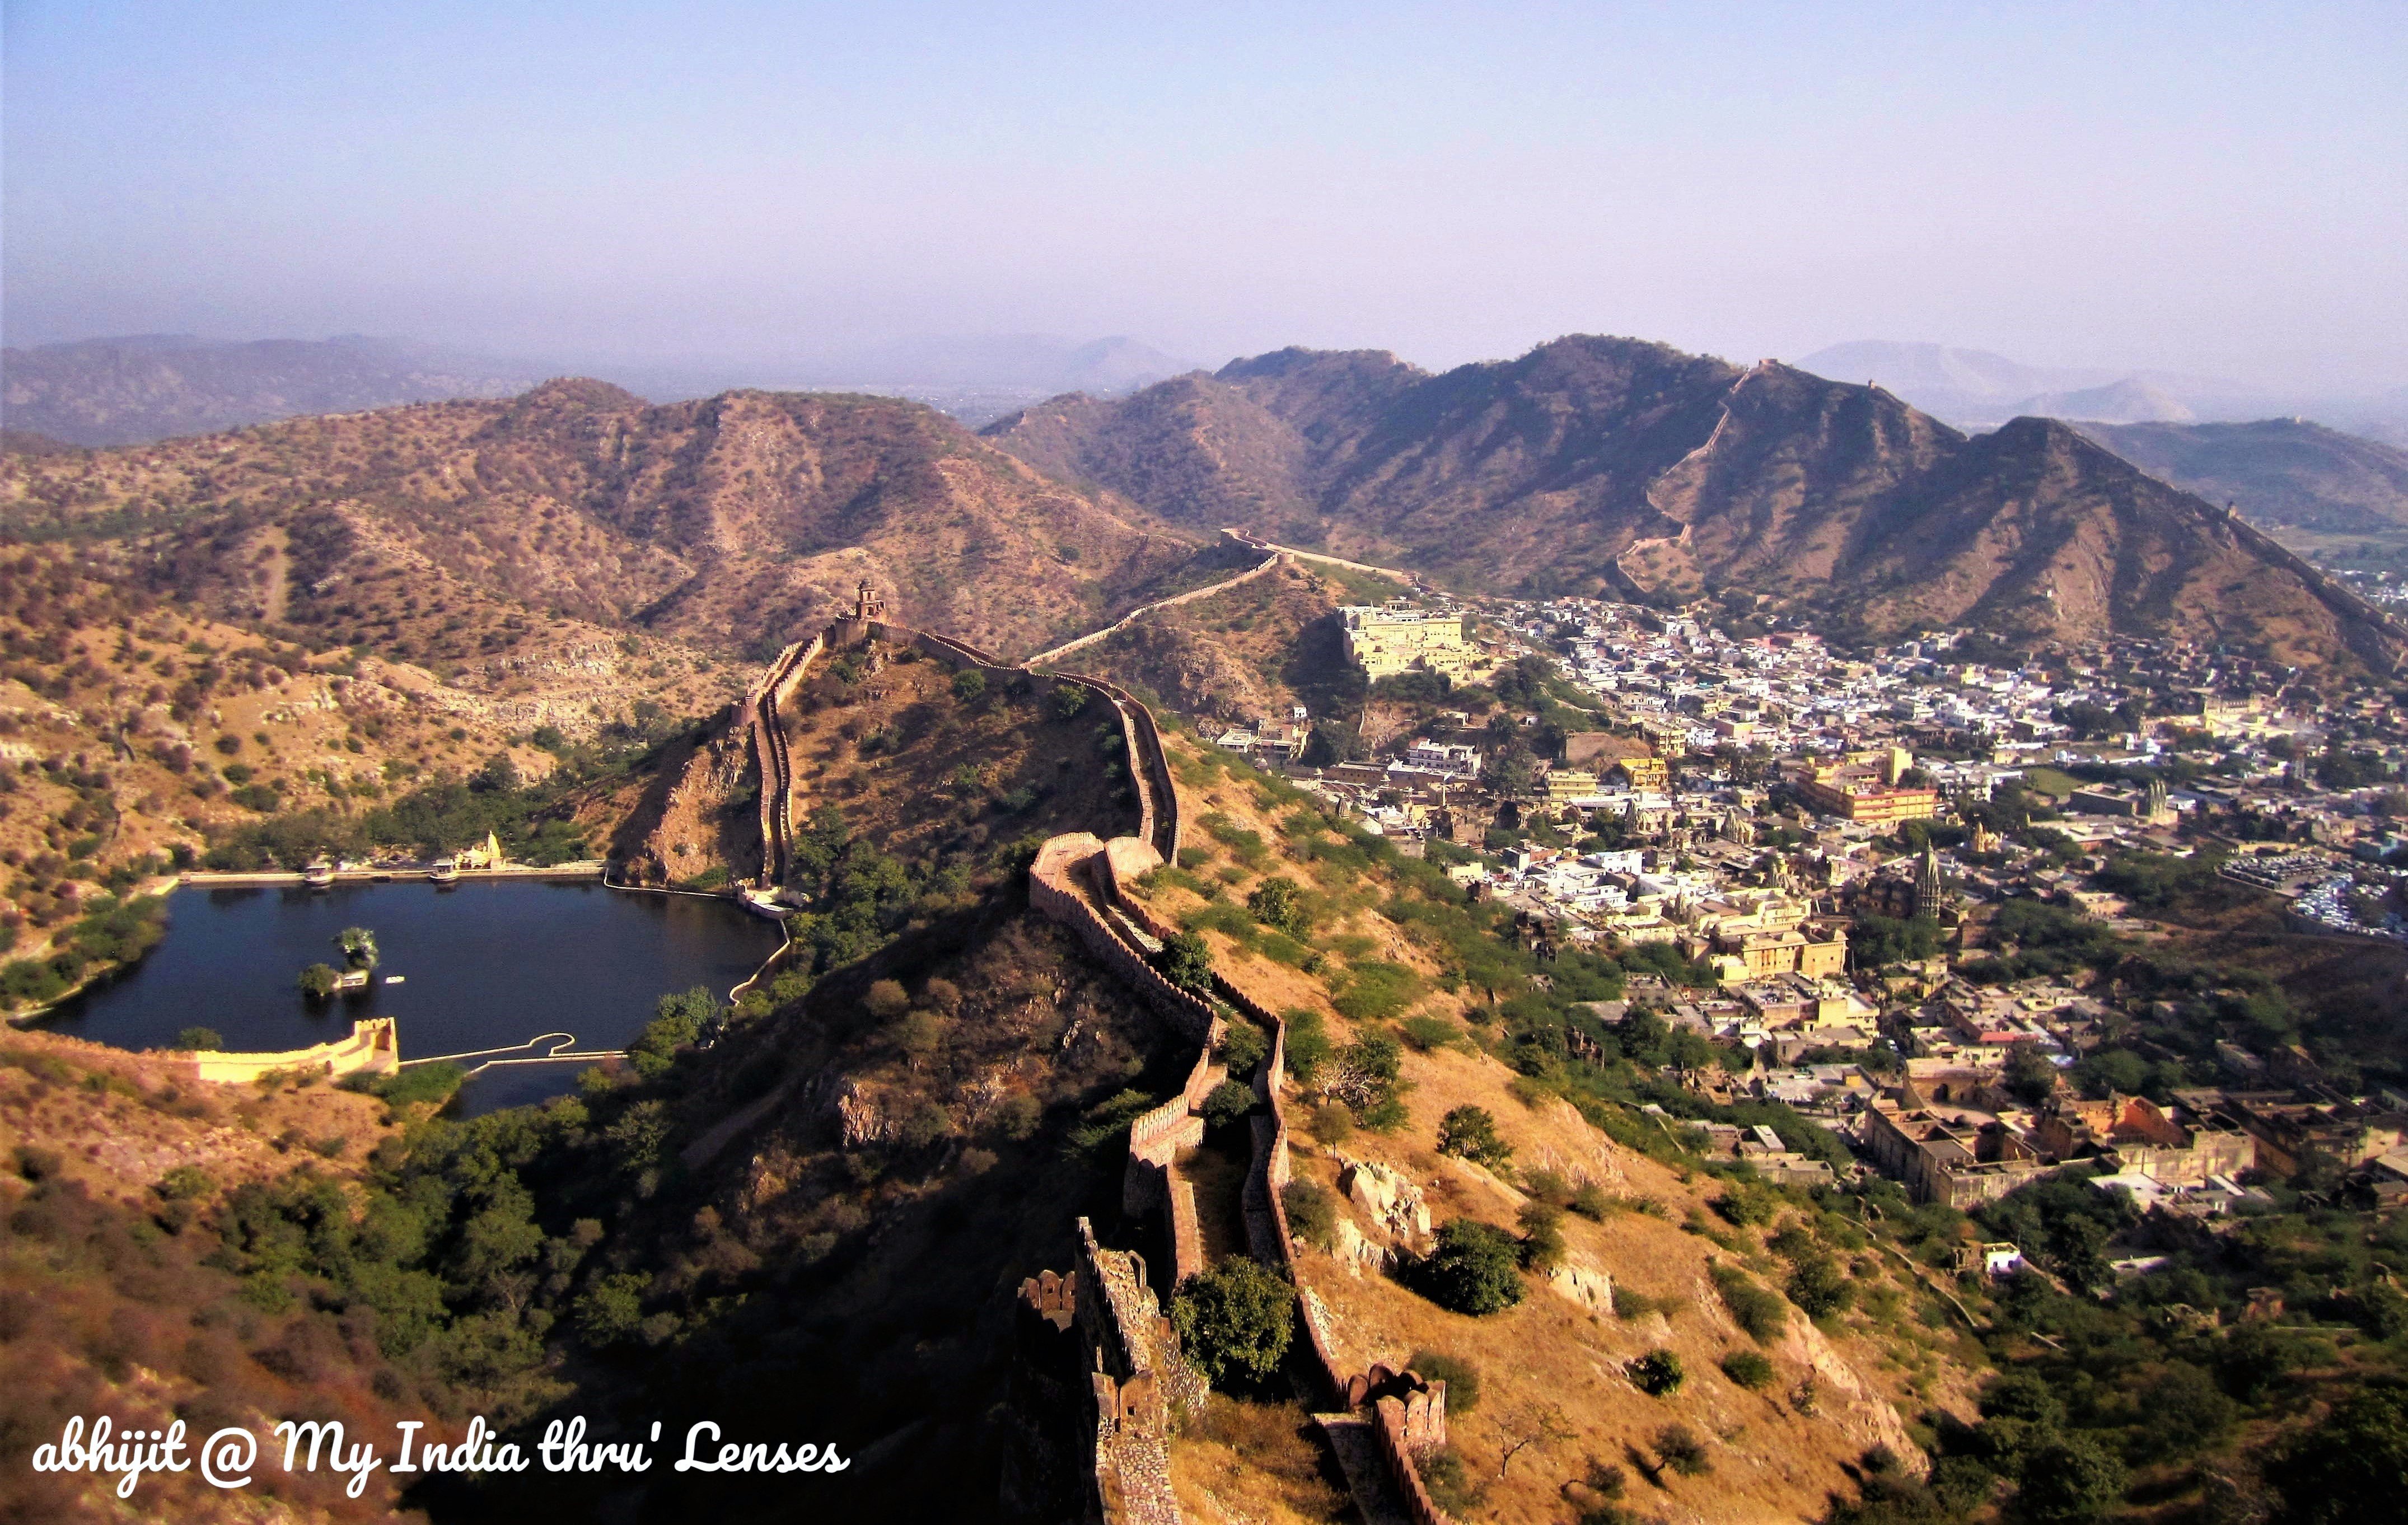 View of Aravalli hills and the fortifications from the top of Jaigarh Fort